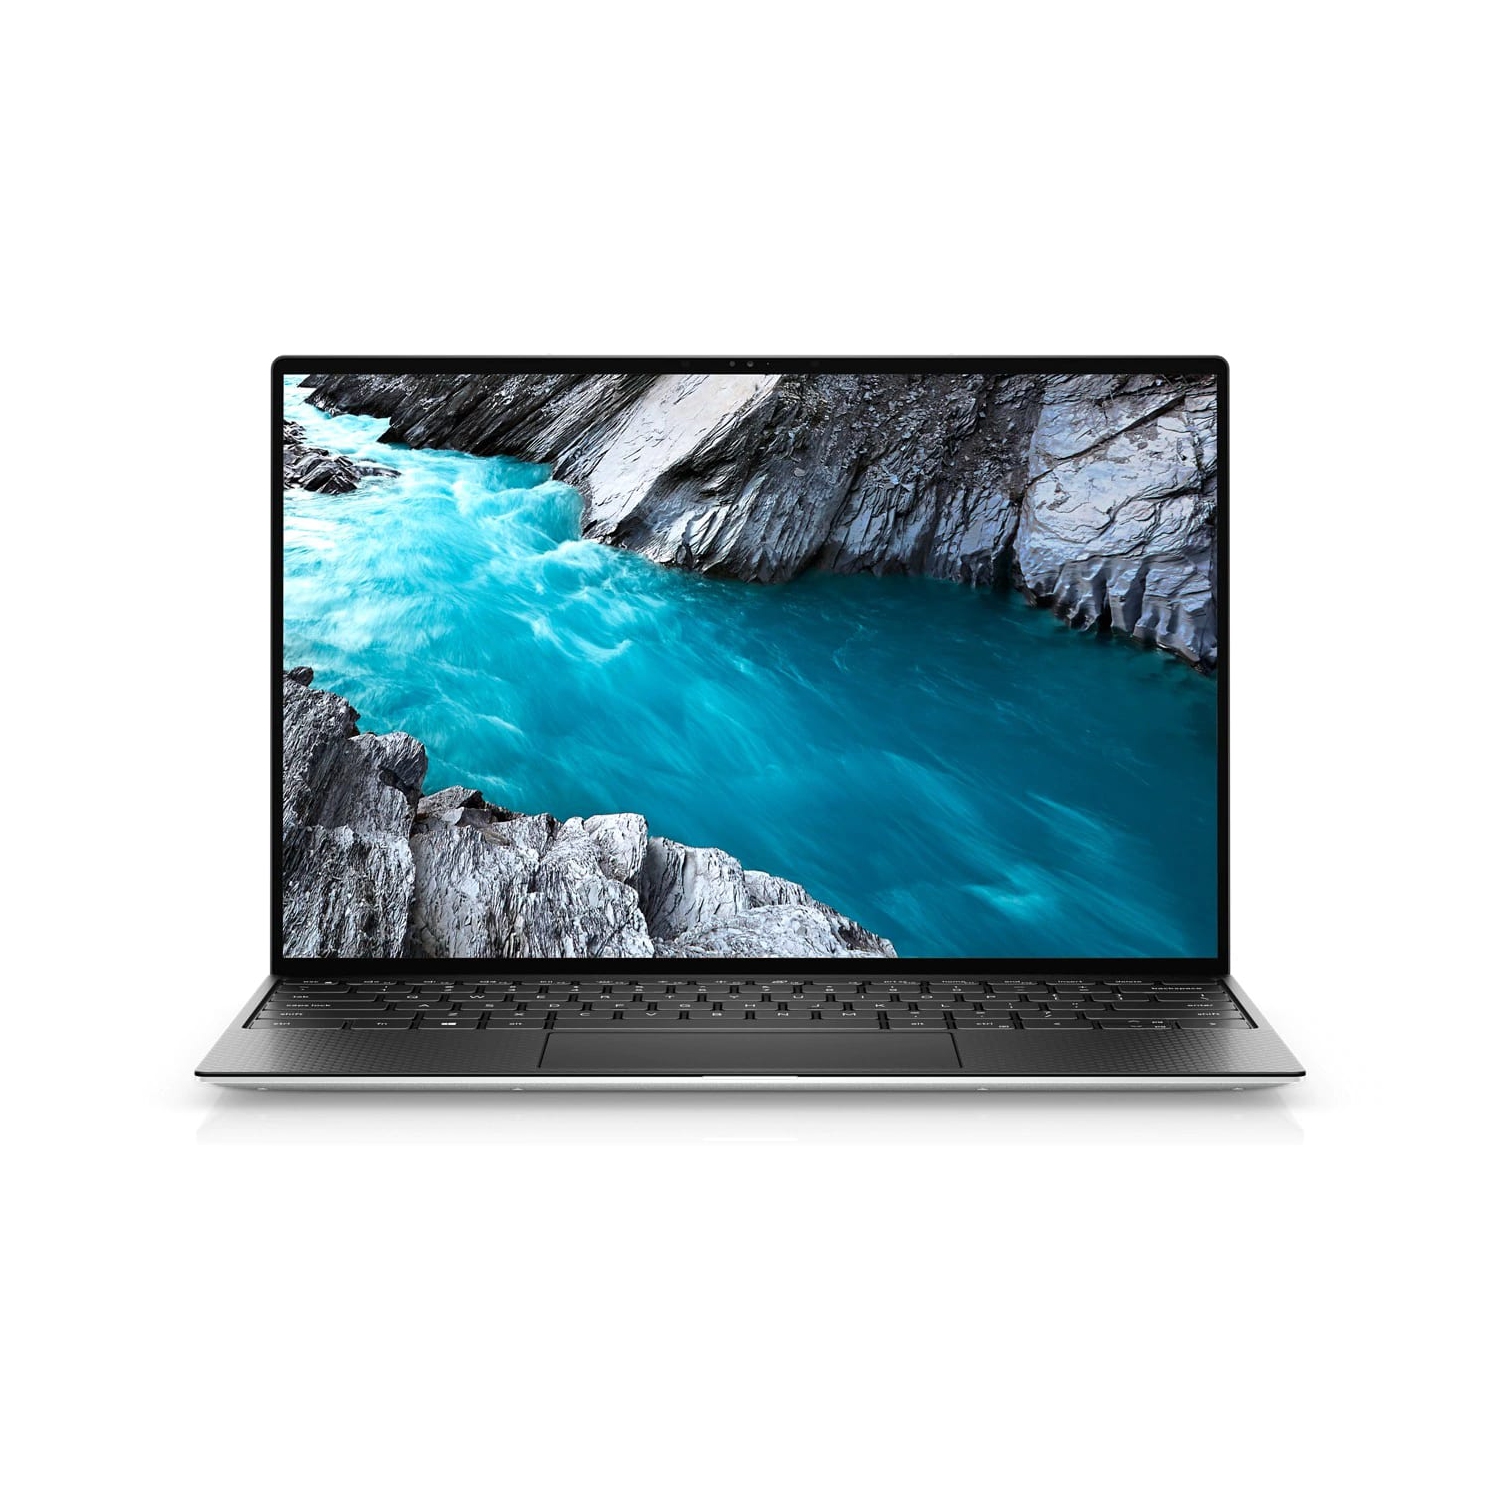 Refurbished (Excellent) - Dell XPS 13 9310 Laptop (2020) | 13.4" FHD+ | Core i7 - 256GB SSD - 16GB RAM | 4 Cores @ 4.7 GHz - 11th Gen CPU Certified Refurbished